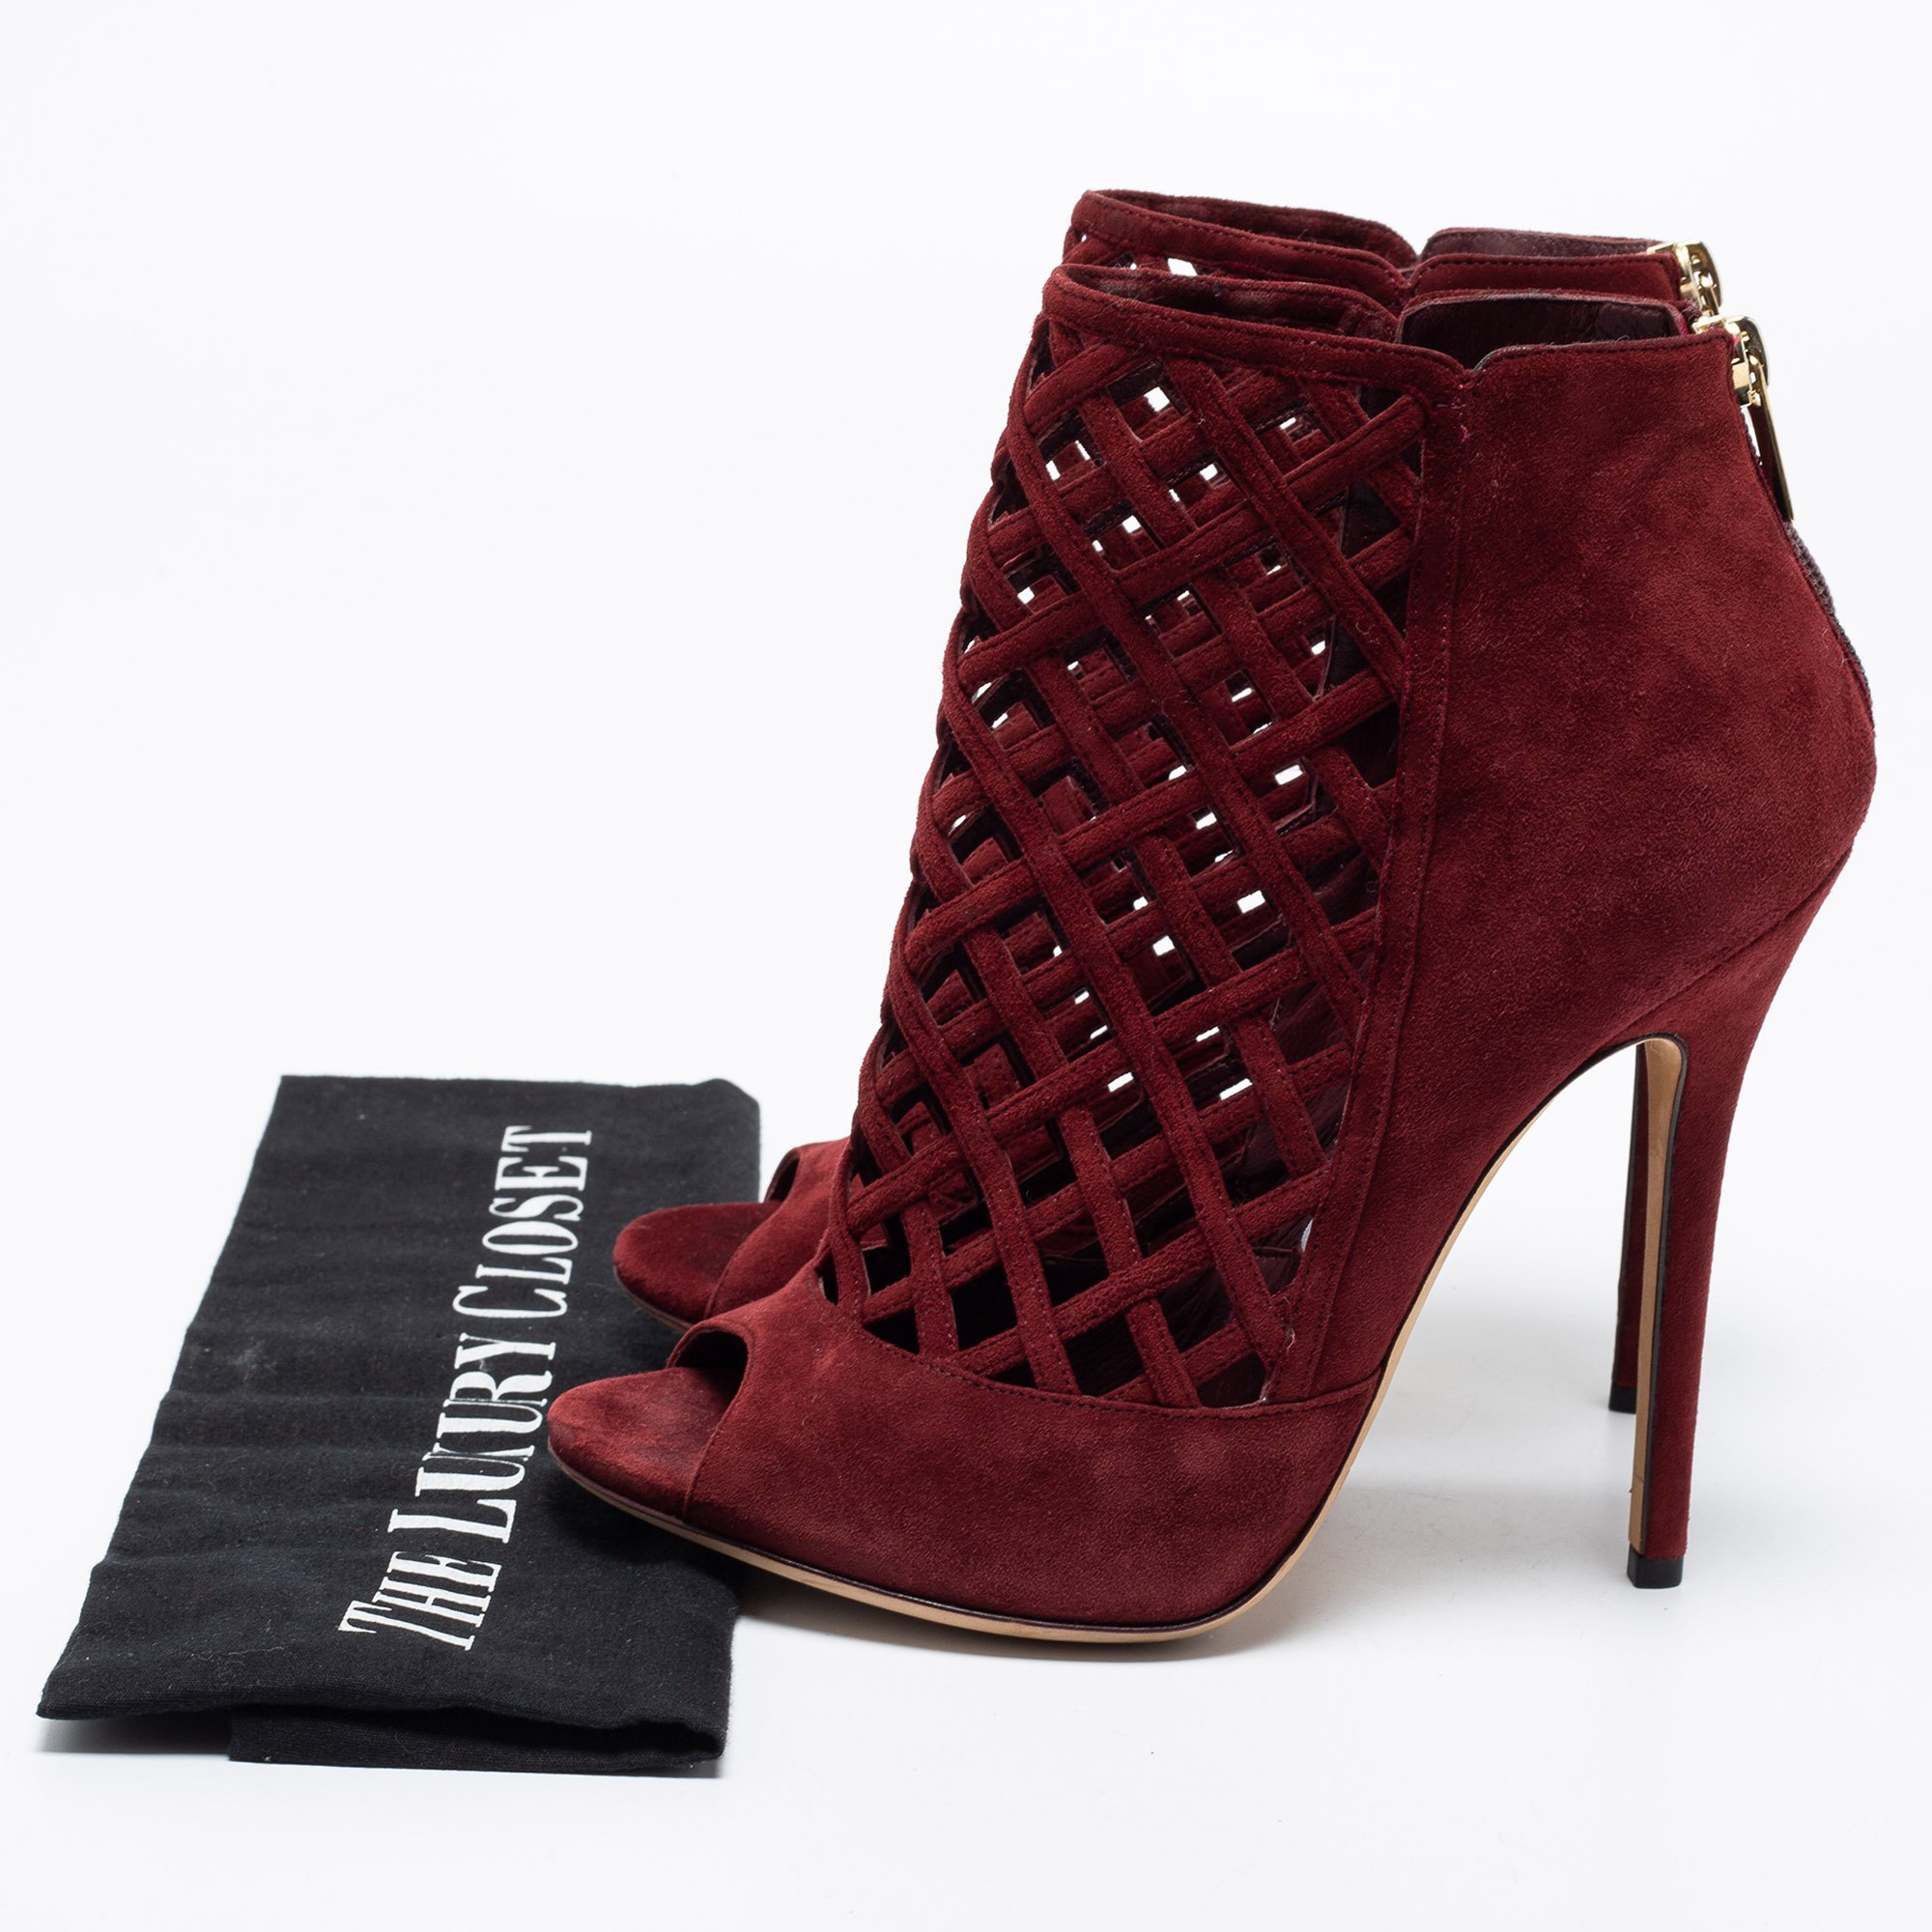 Jimmy Choo Burgundy Suede Drift Cut-Out Peep-Toe Ankle Booties Size 38